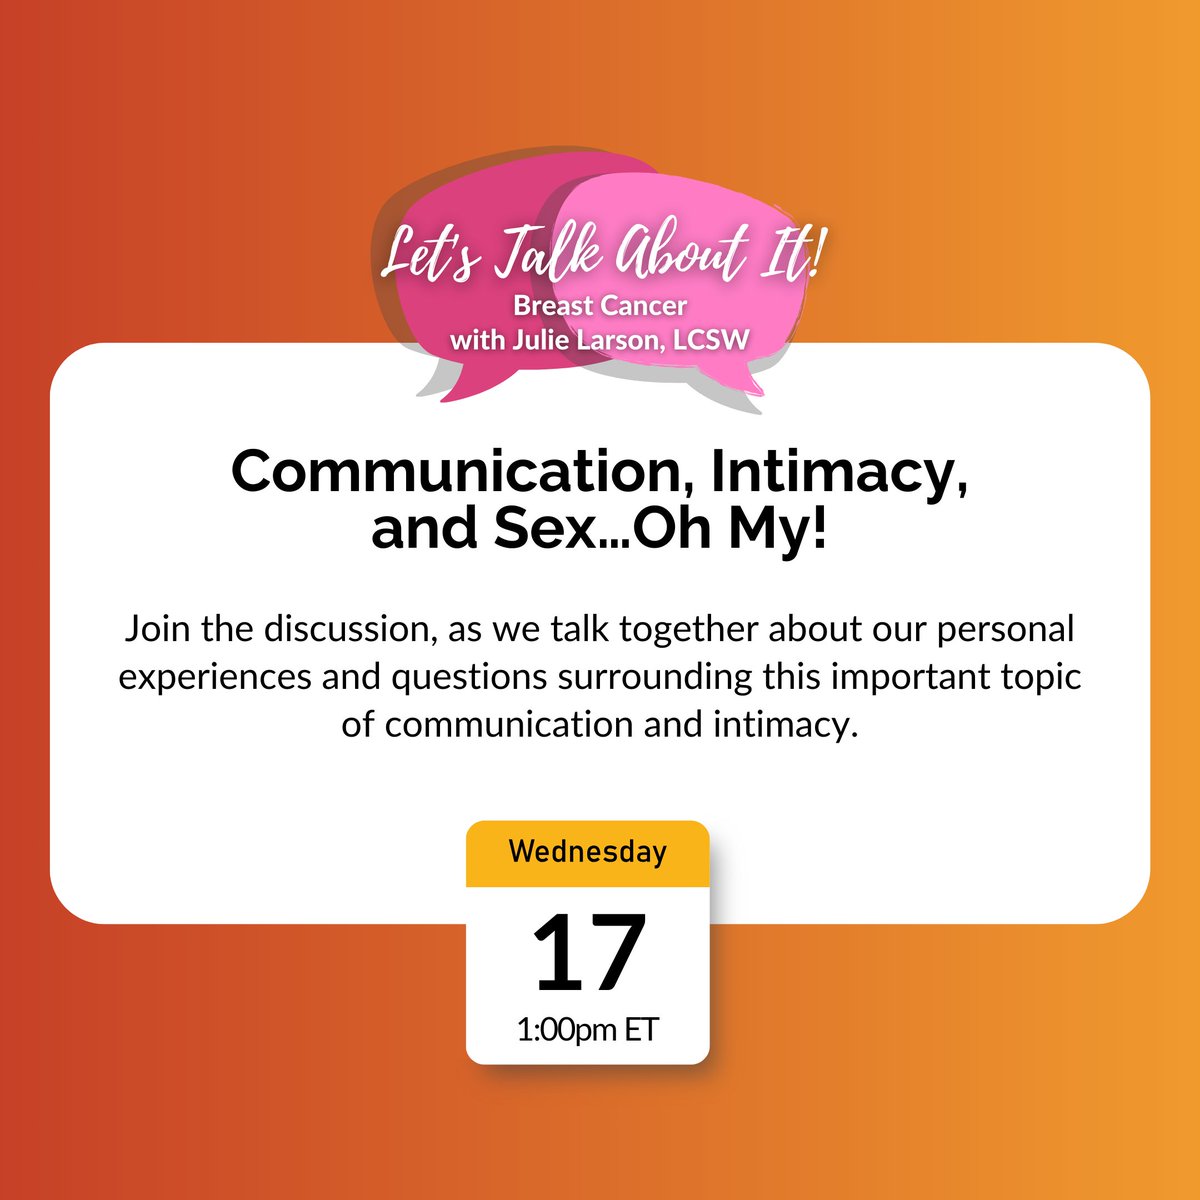 Part 1👀 Sneak peek at our FREE programs next week! We’re talking sex and intimacy, learning how to cope with grief, understanding your blood test results, and how to advocate for your health during or after cancer. Save your spot for FREE: bit.ly/3FvPxY7 #CancerSupport